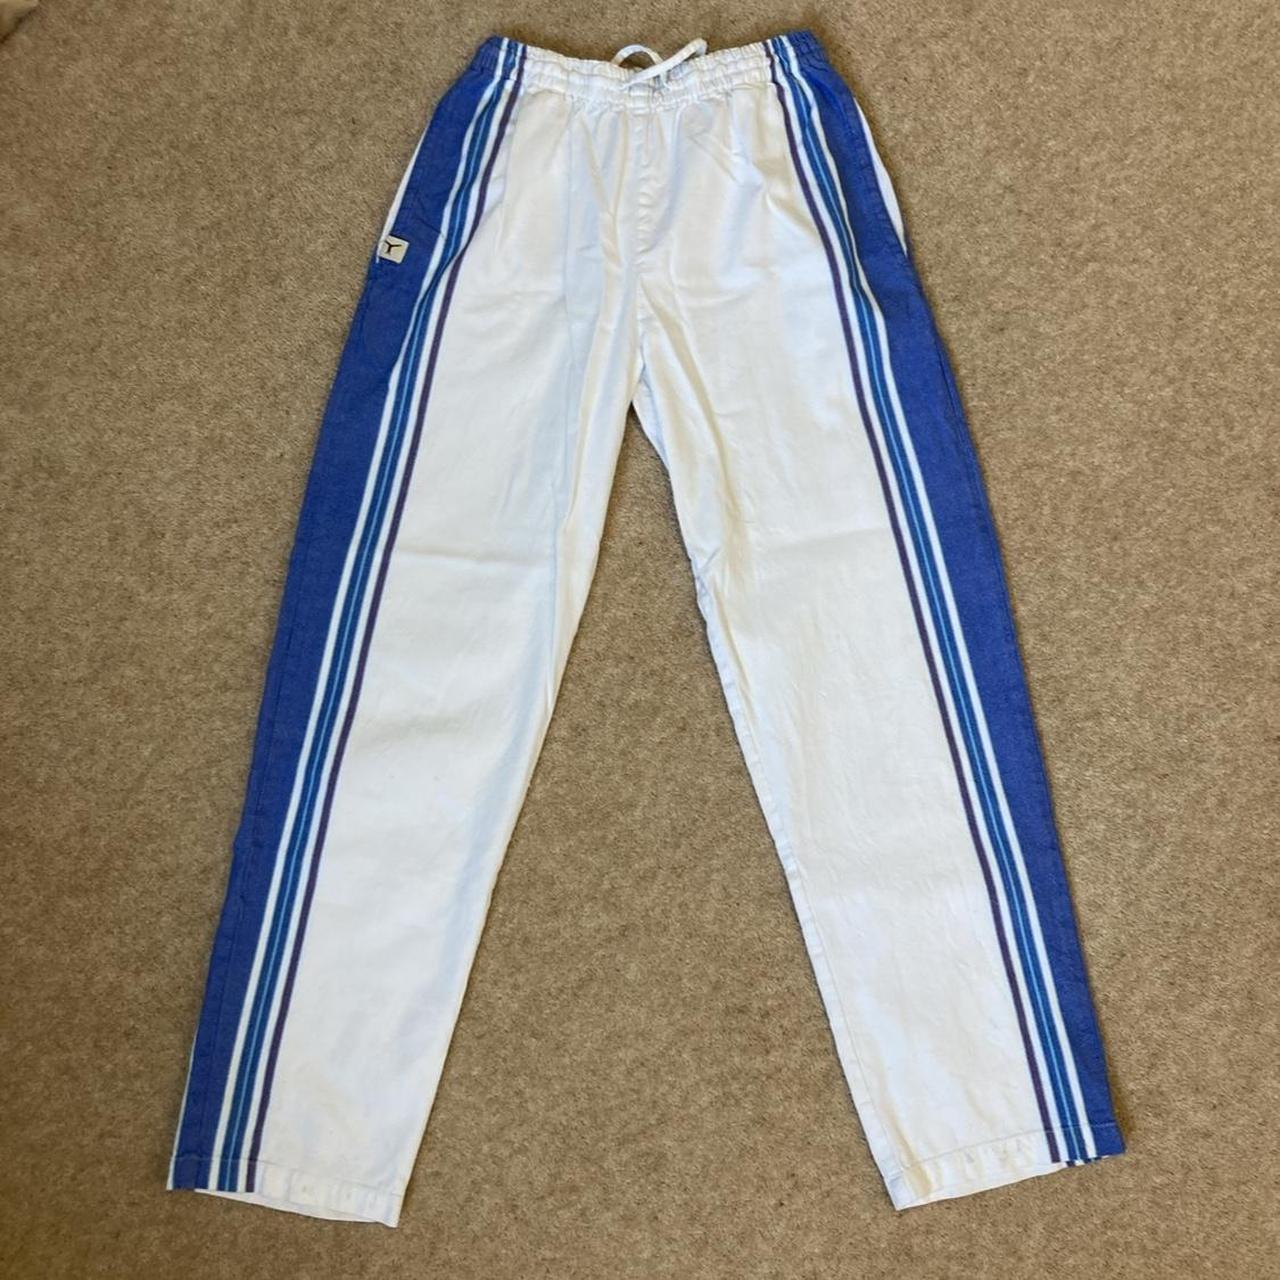 Toms Trunks - white and blue, size M - Depop